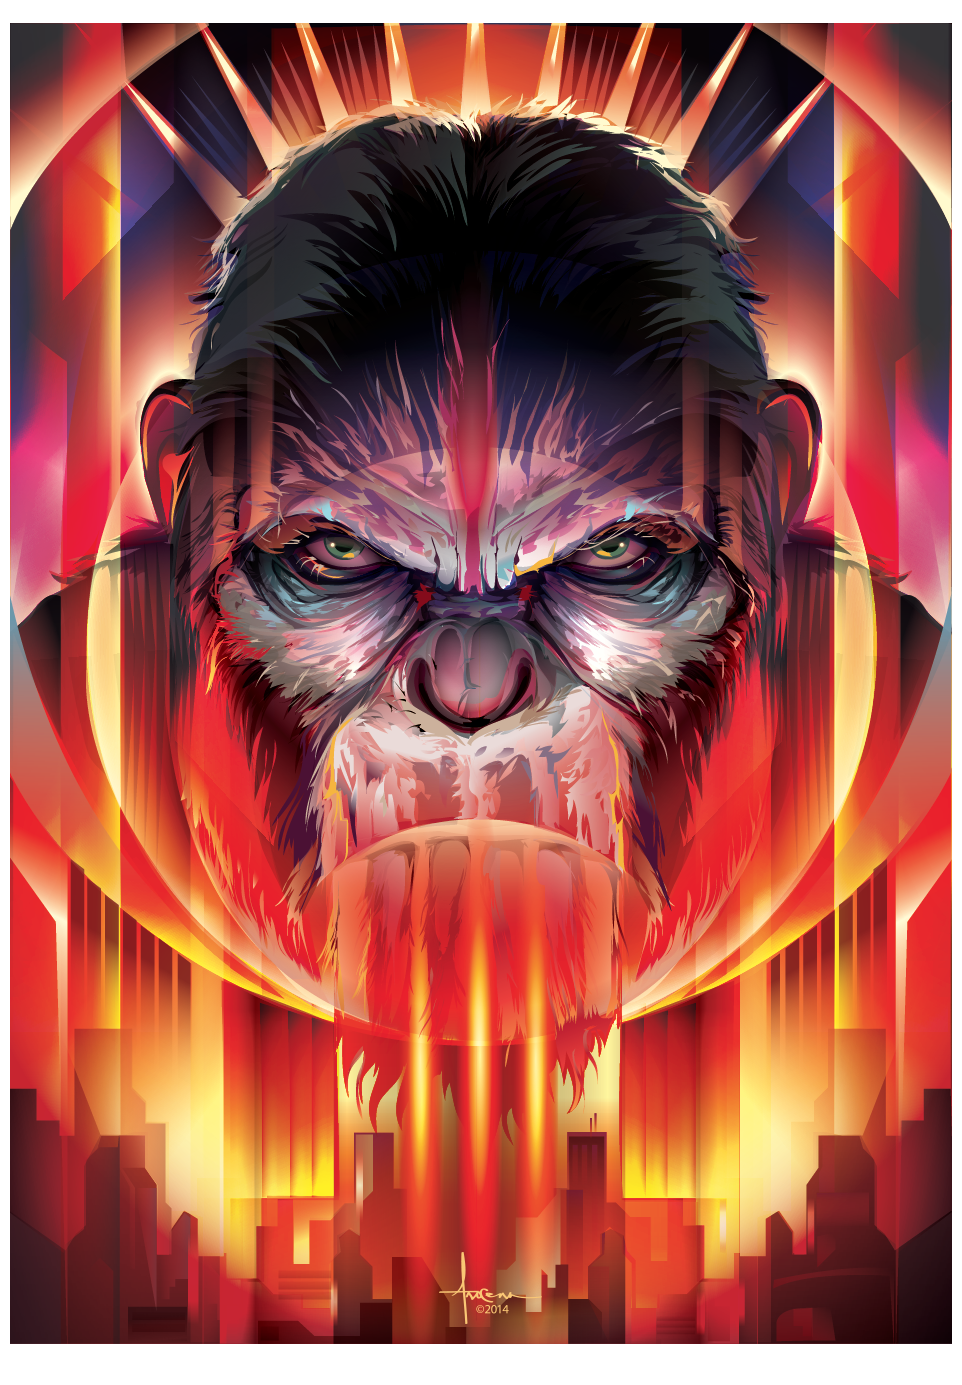 vector Illustrator arocena planetoftheapes apes movie poster gradients DAWN city popdeco pop eyes fiery